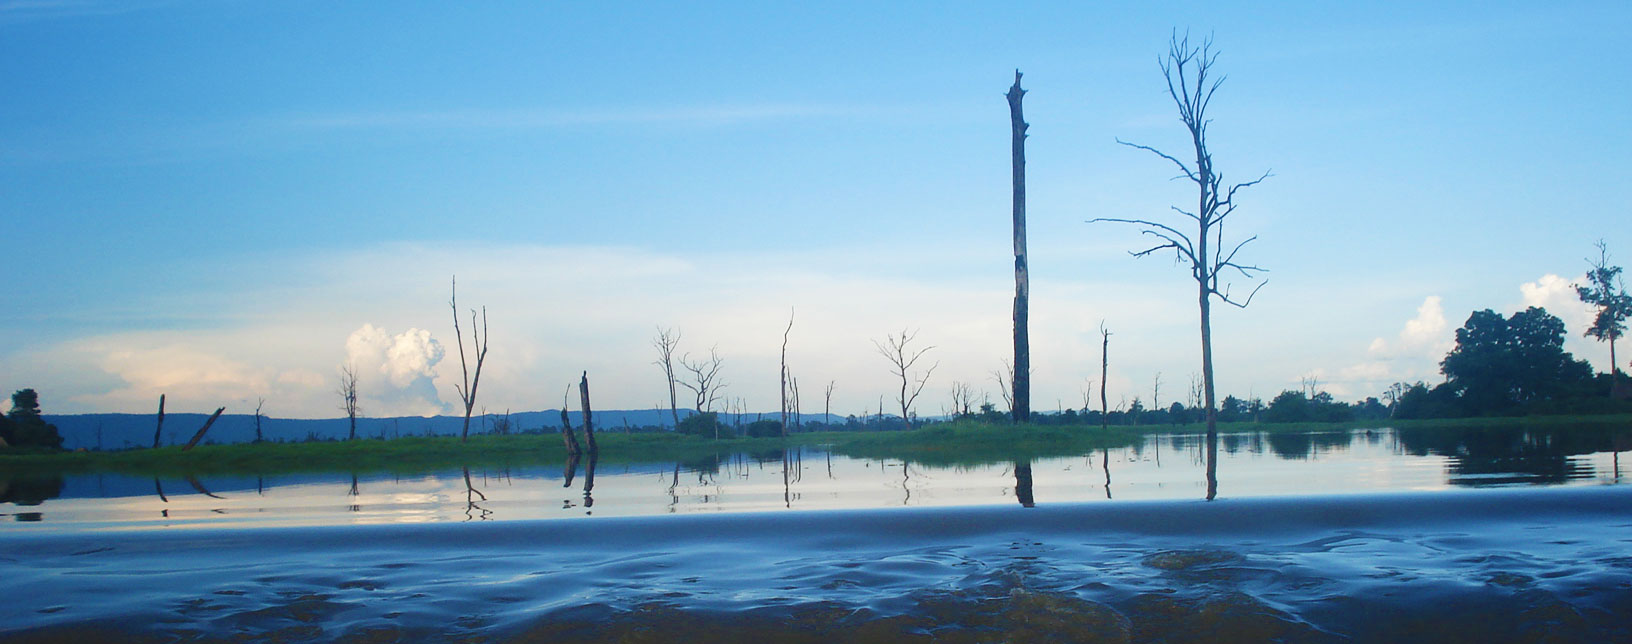 The Flooded Forest in Anlong Veng